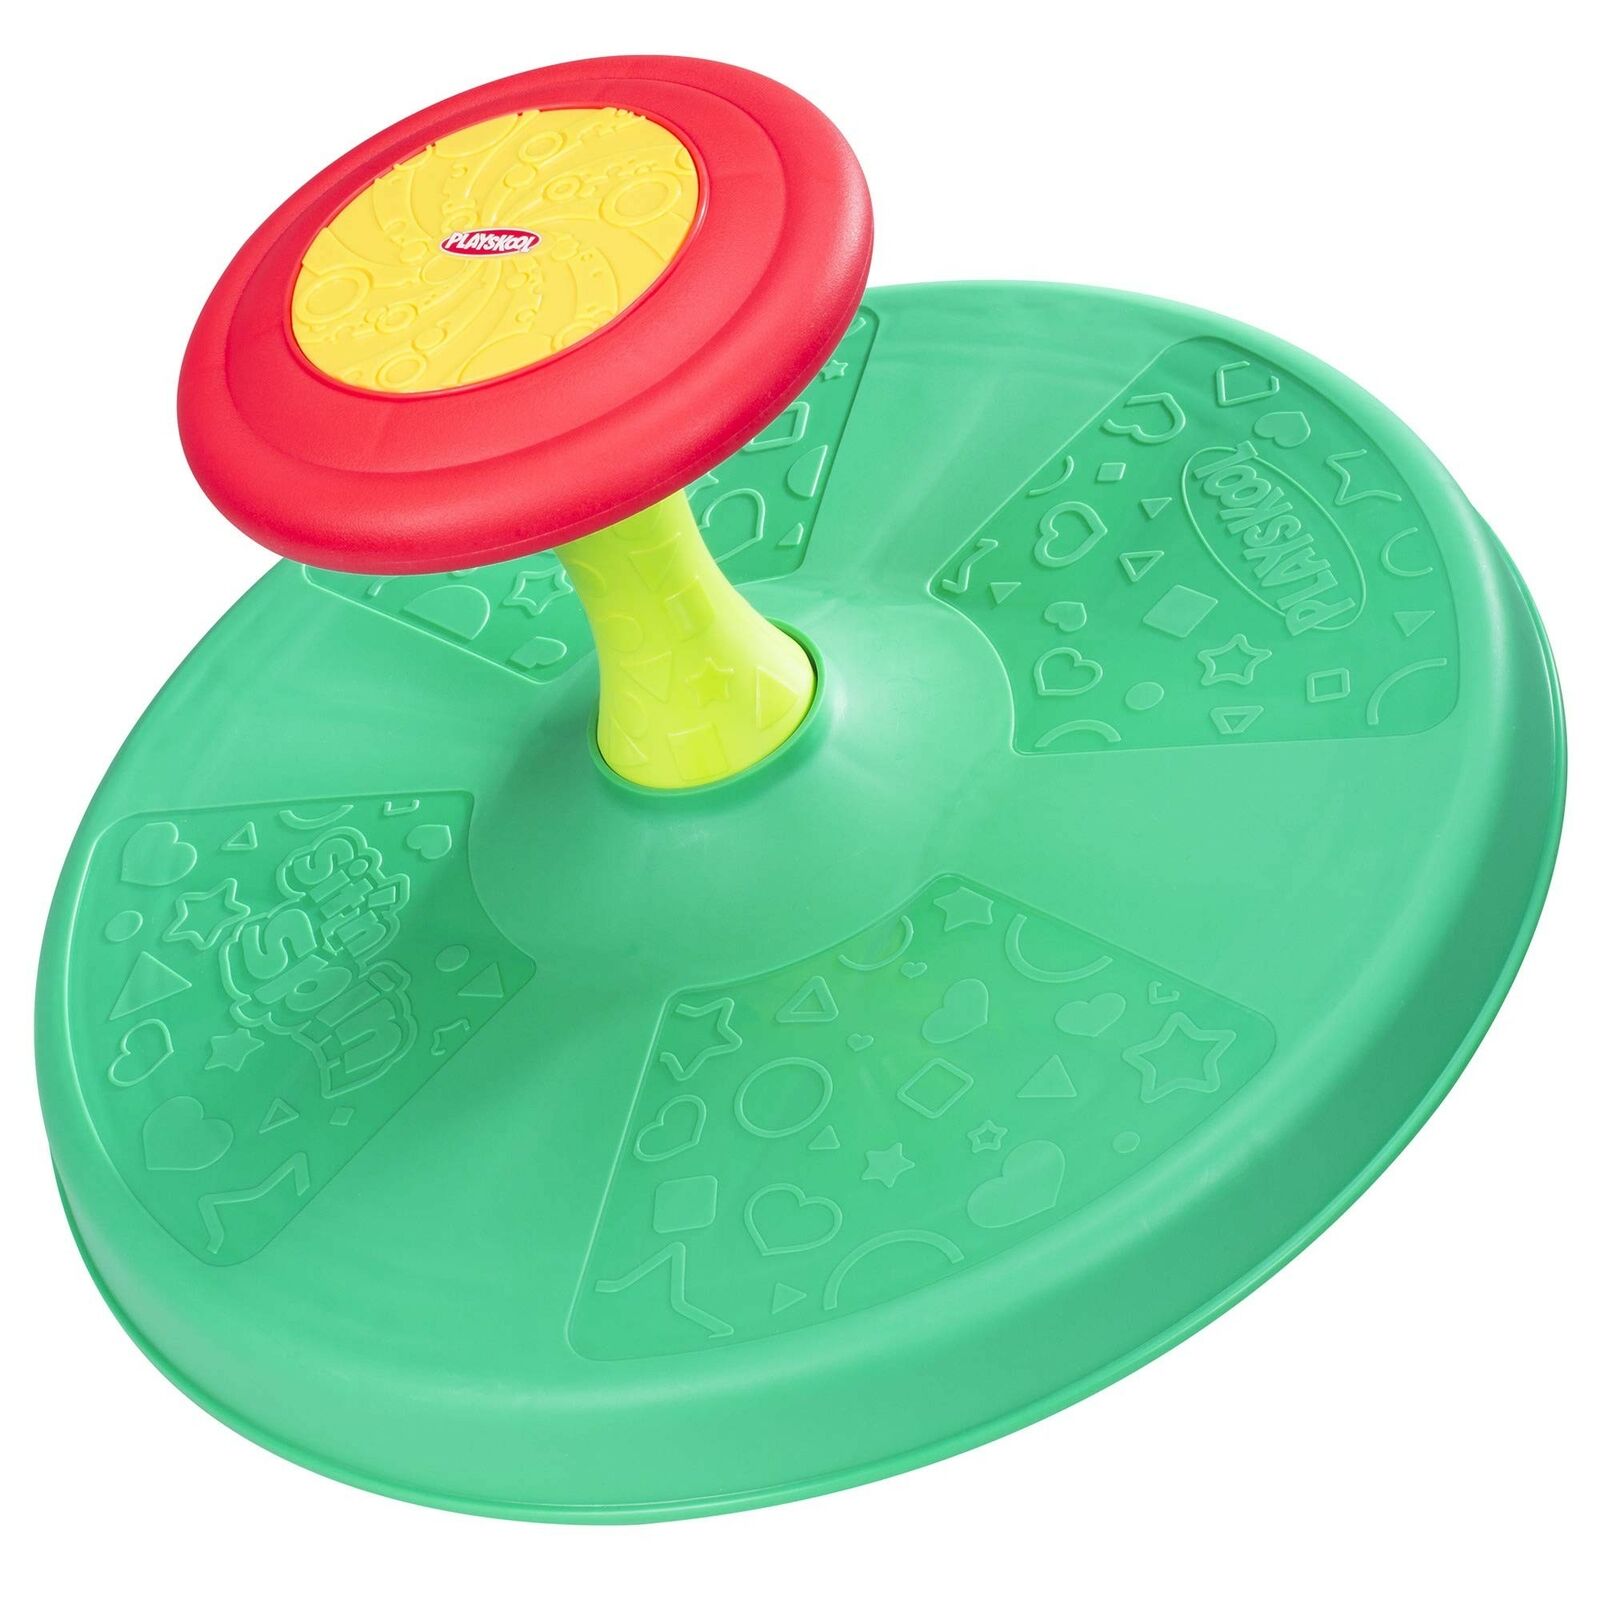 Playskool Sit ‘n Spin Classic Spinning Activity Toy for Toddlers Ages Over 18...